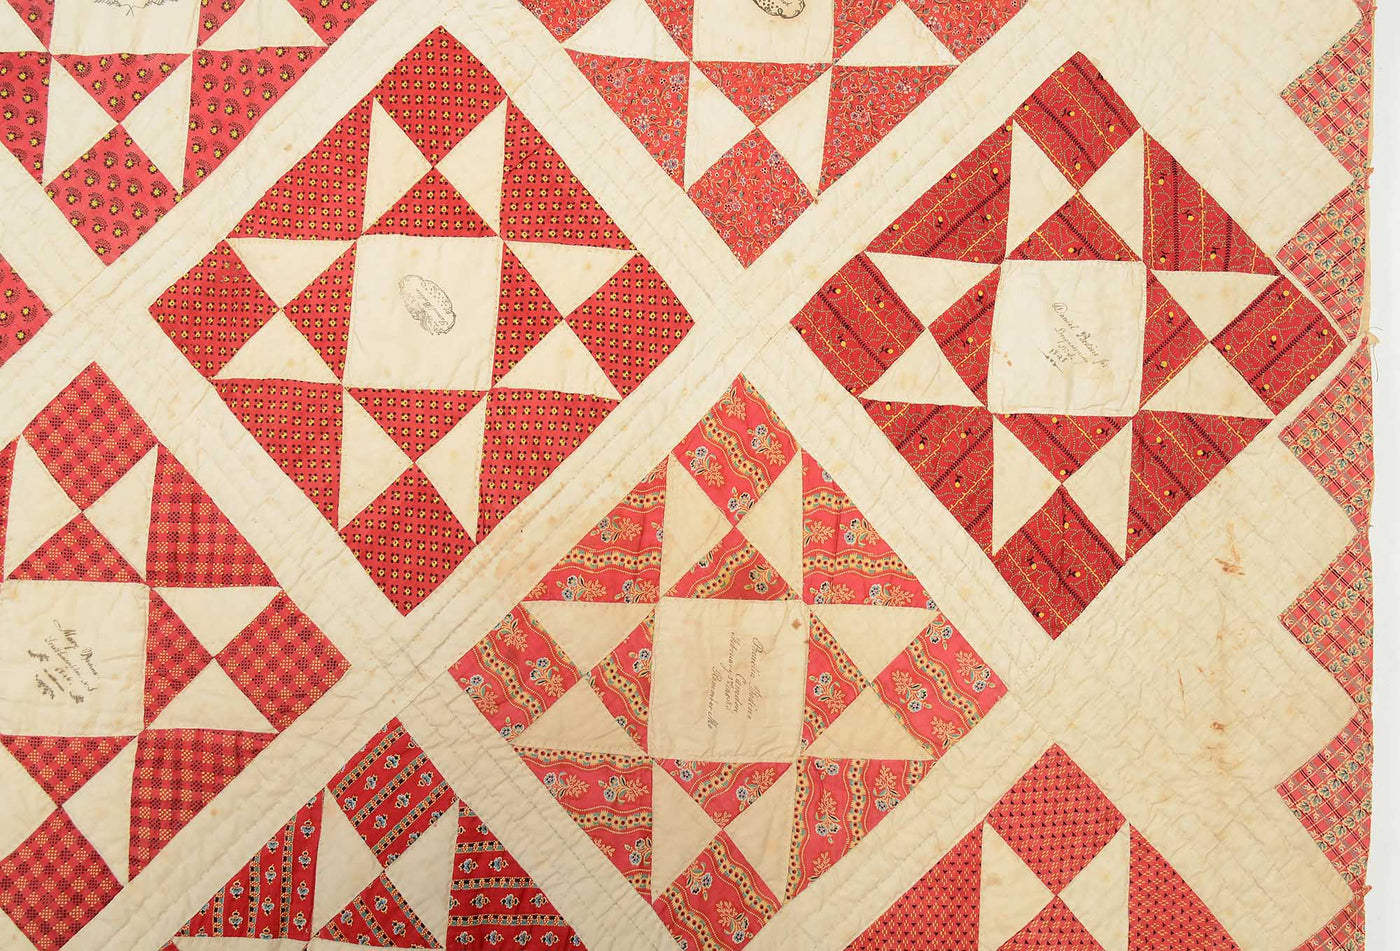 inscribed-and-dated-1845-wedding-quilt-1430039-detail-10